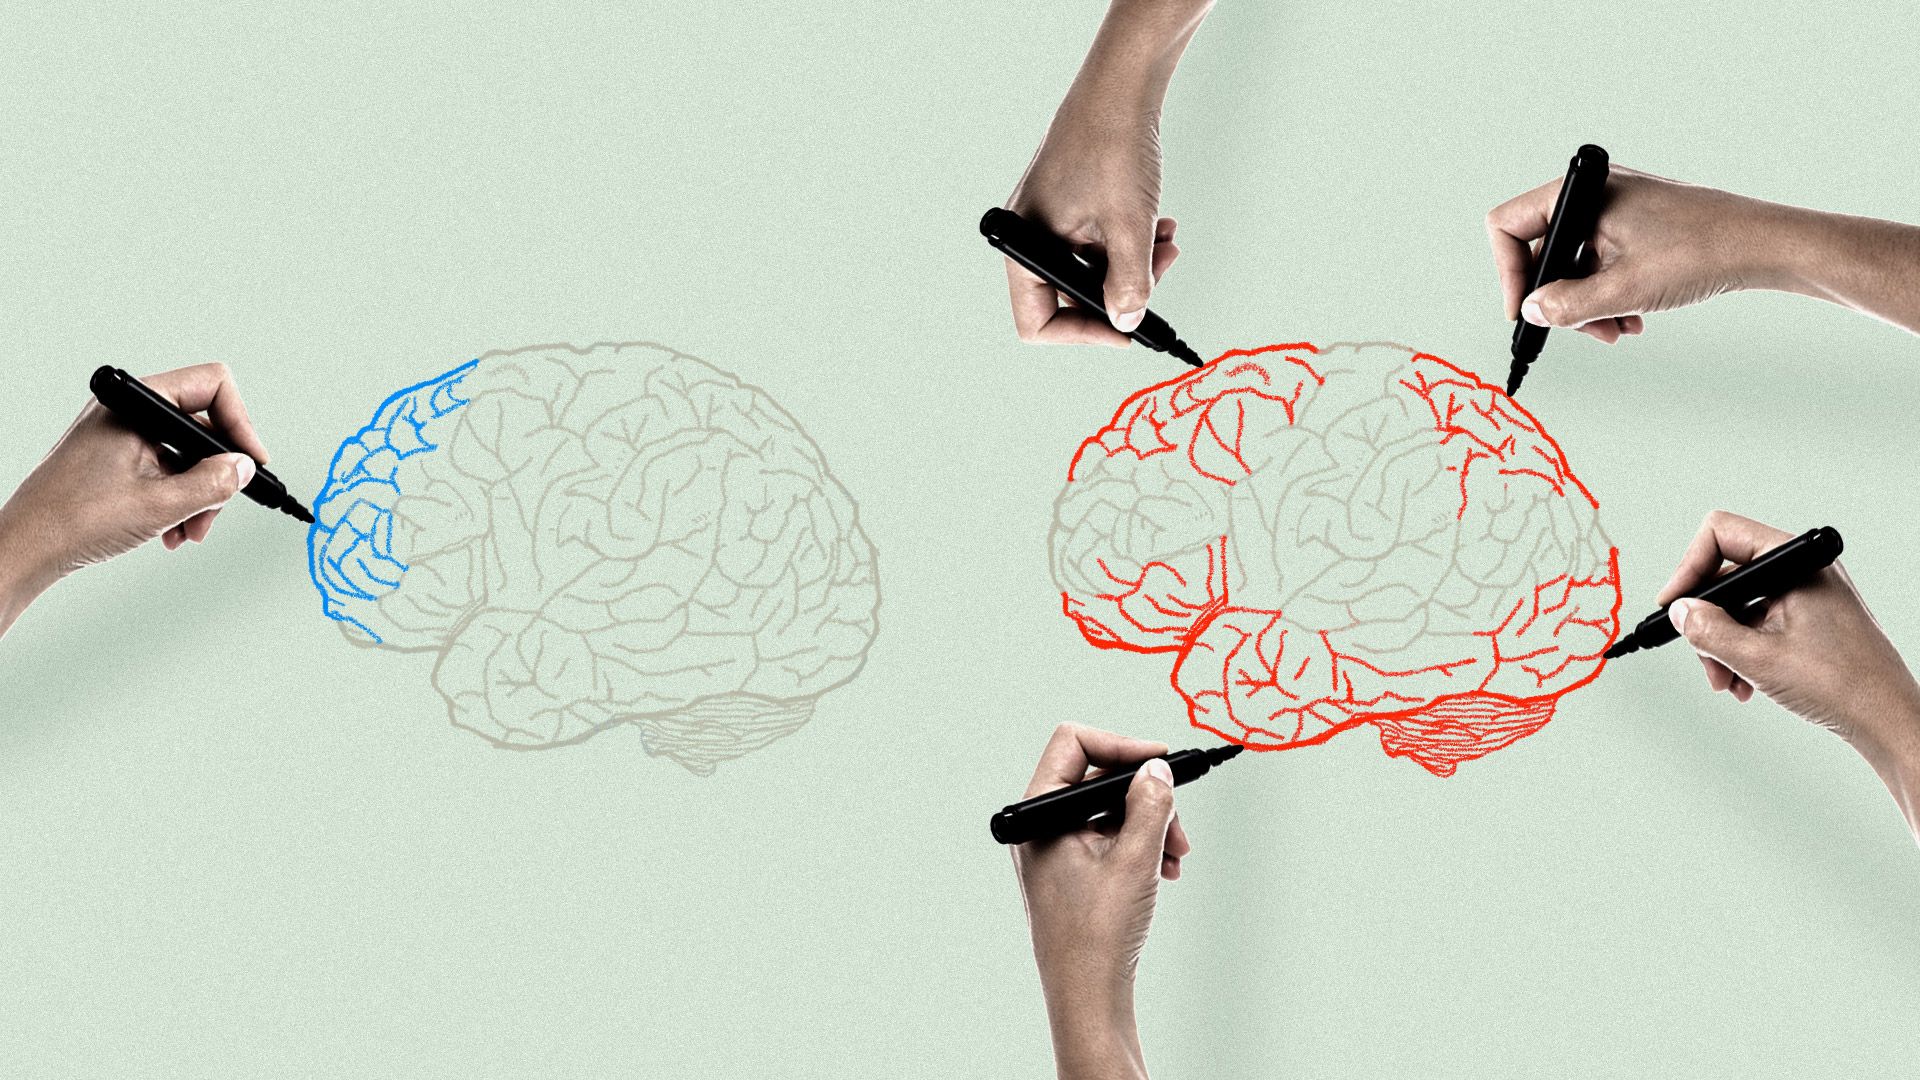 Illustration of hands drawing brains